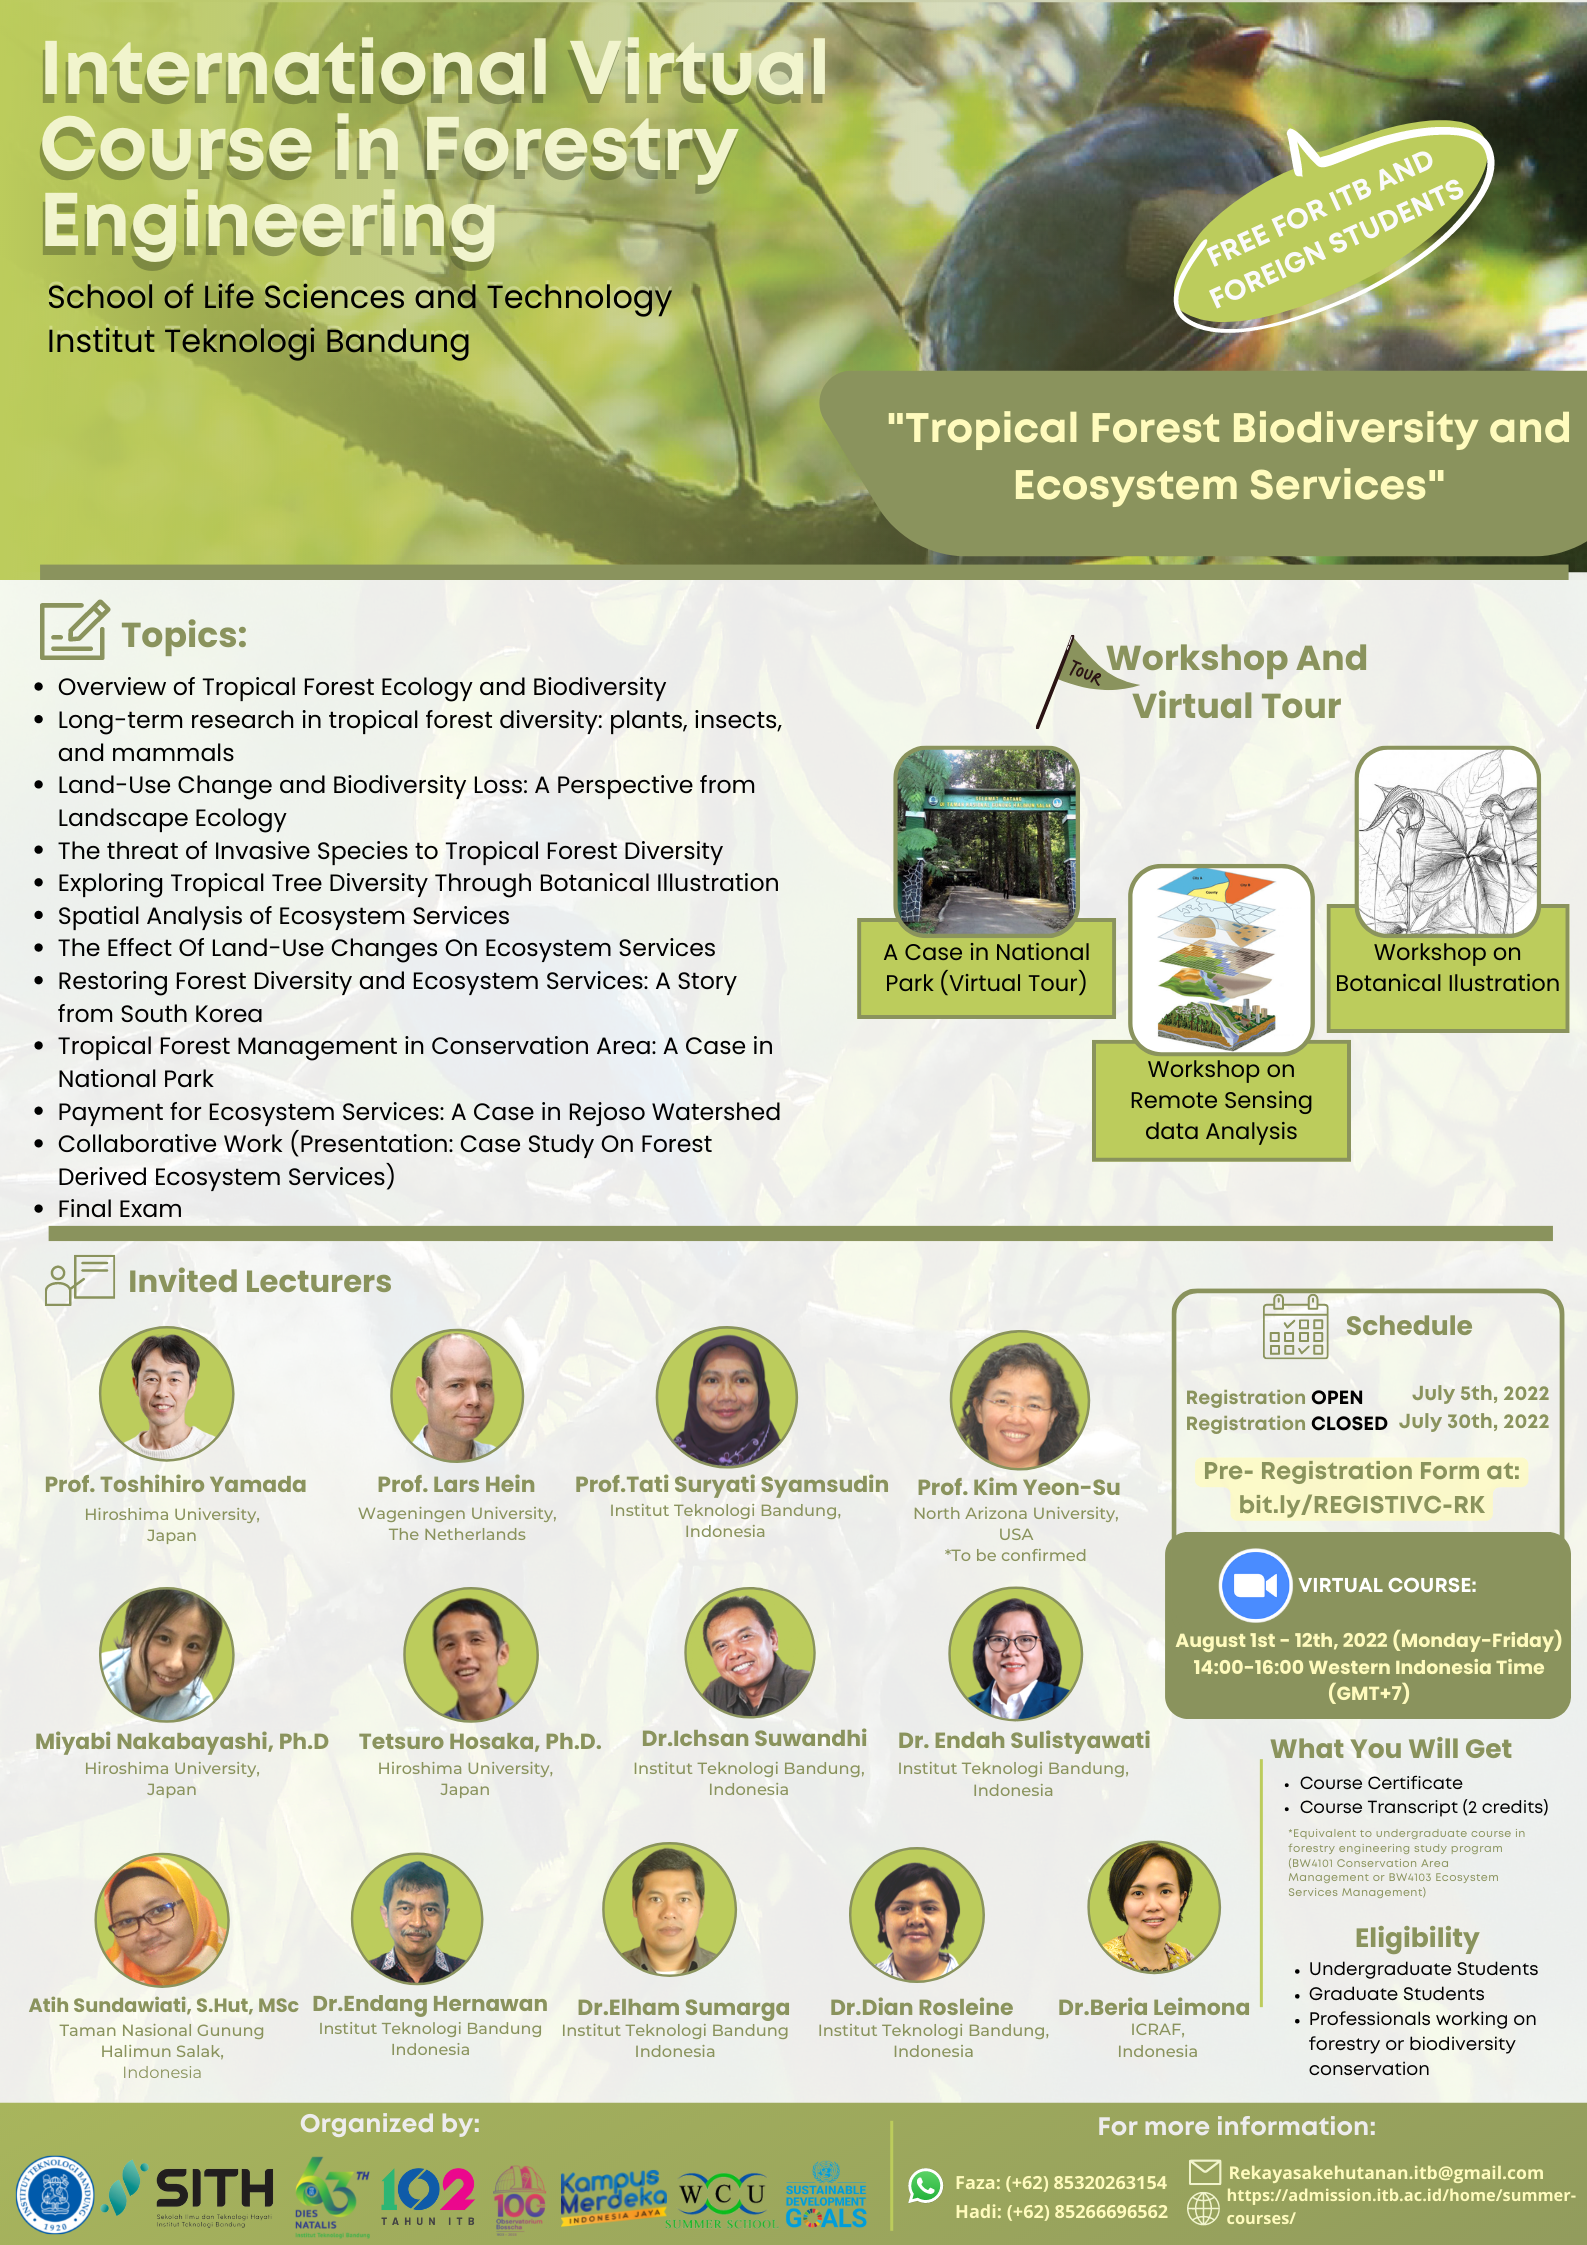 International Virtual Course in Forestry Engineering: Tropical Forest Biodiversity and Ecosystem Services